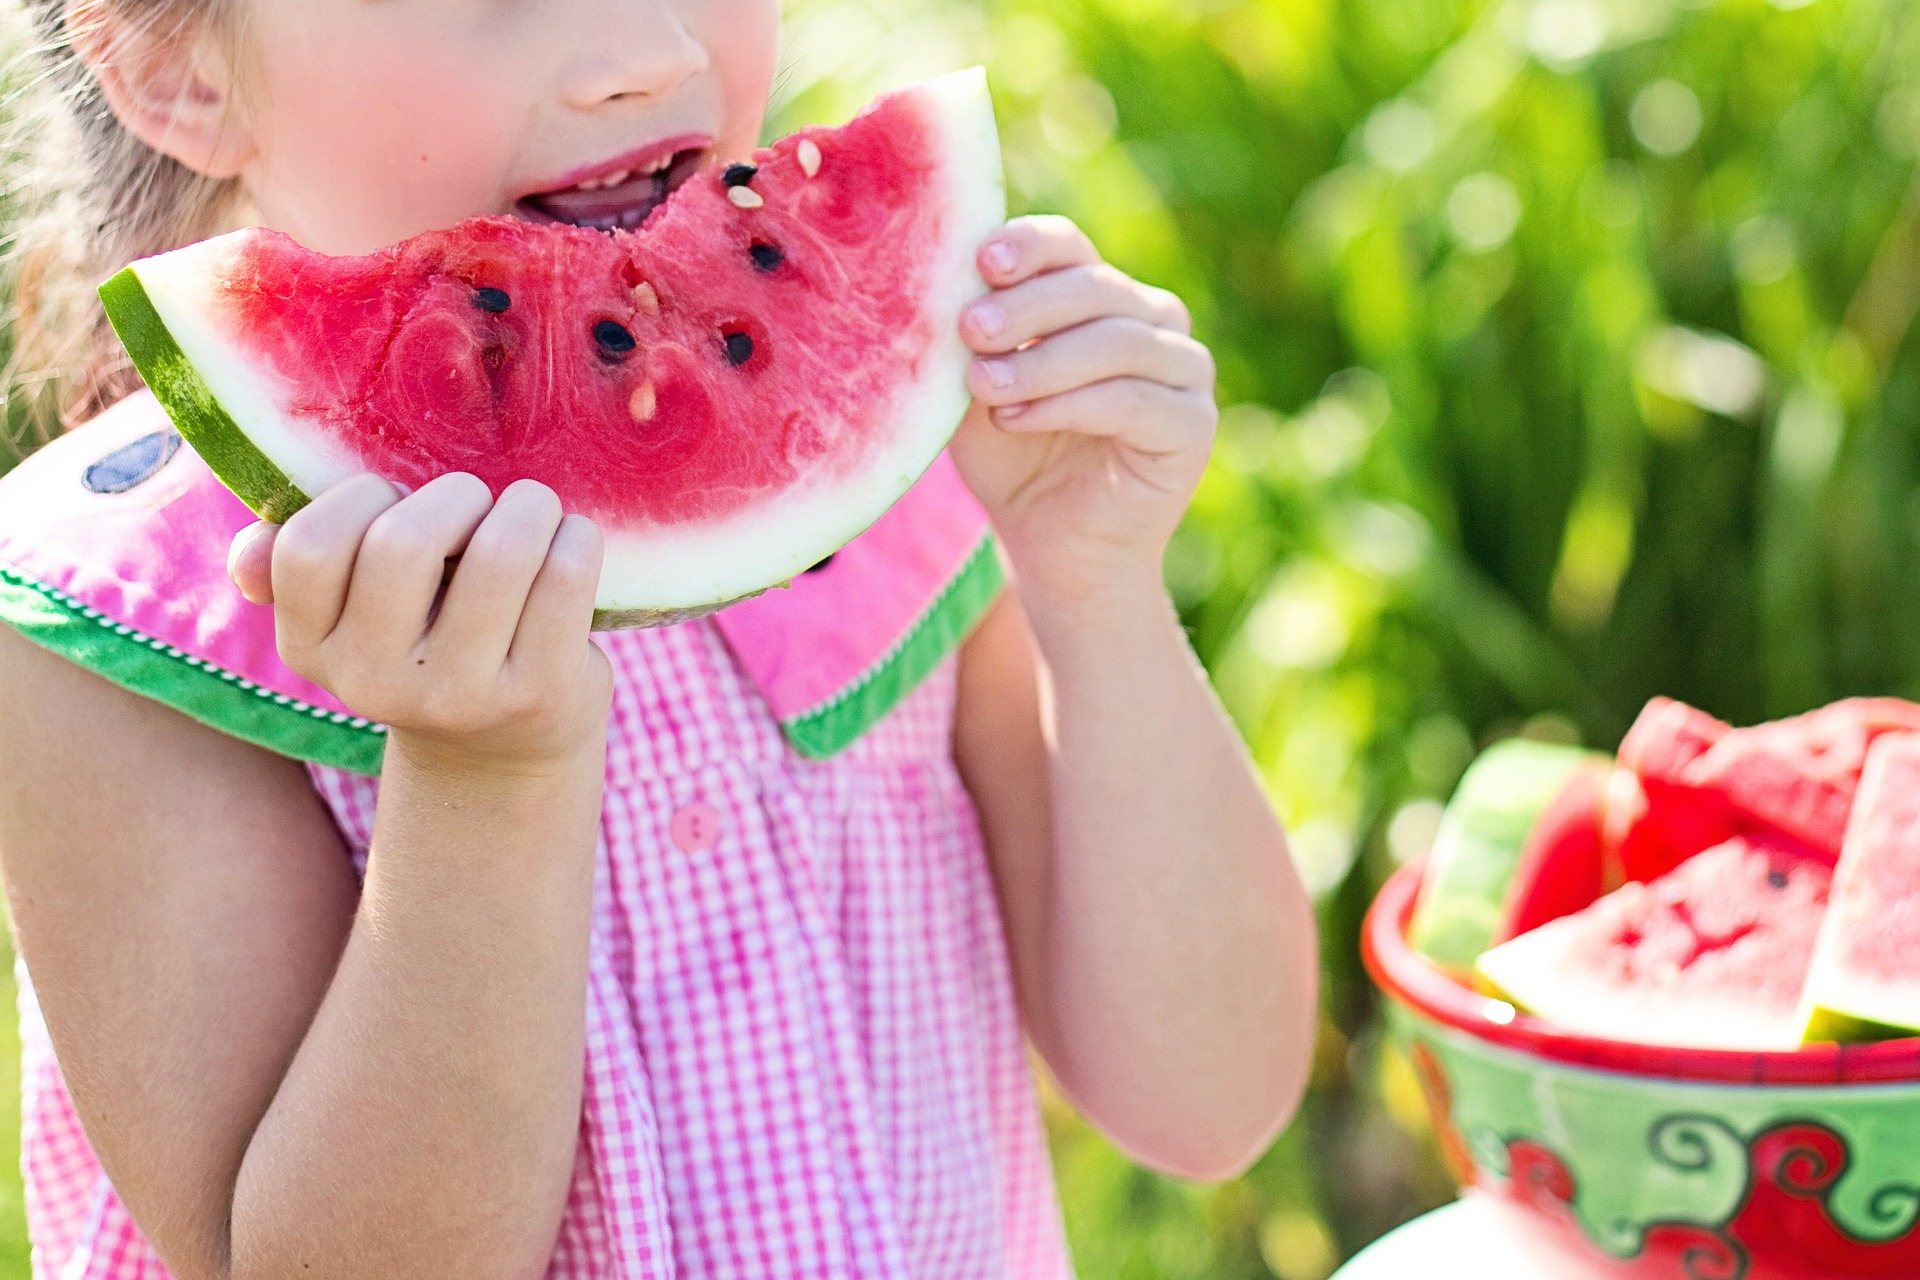 Child eating a slice of watermelon.